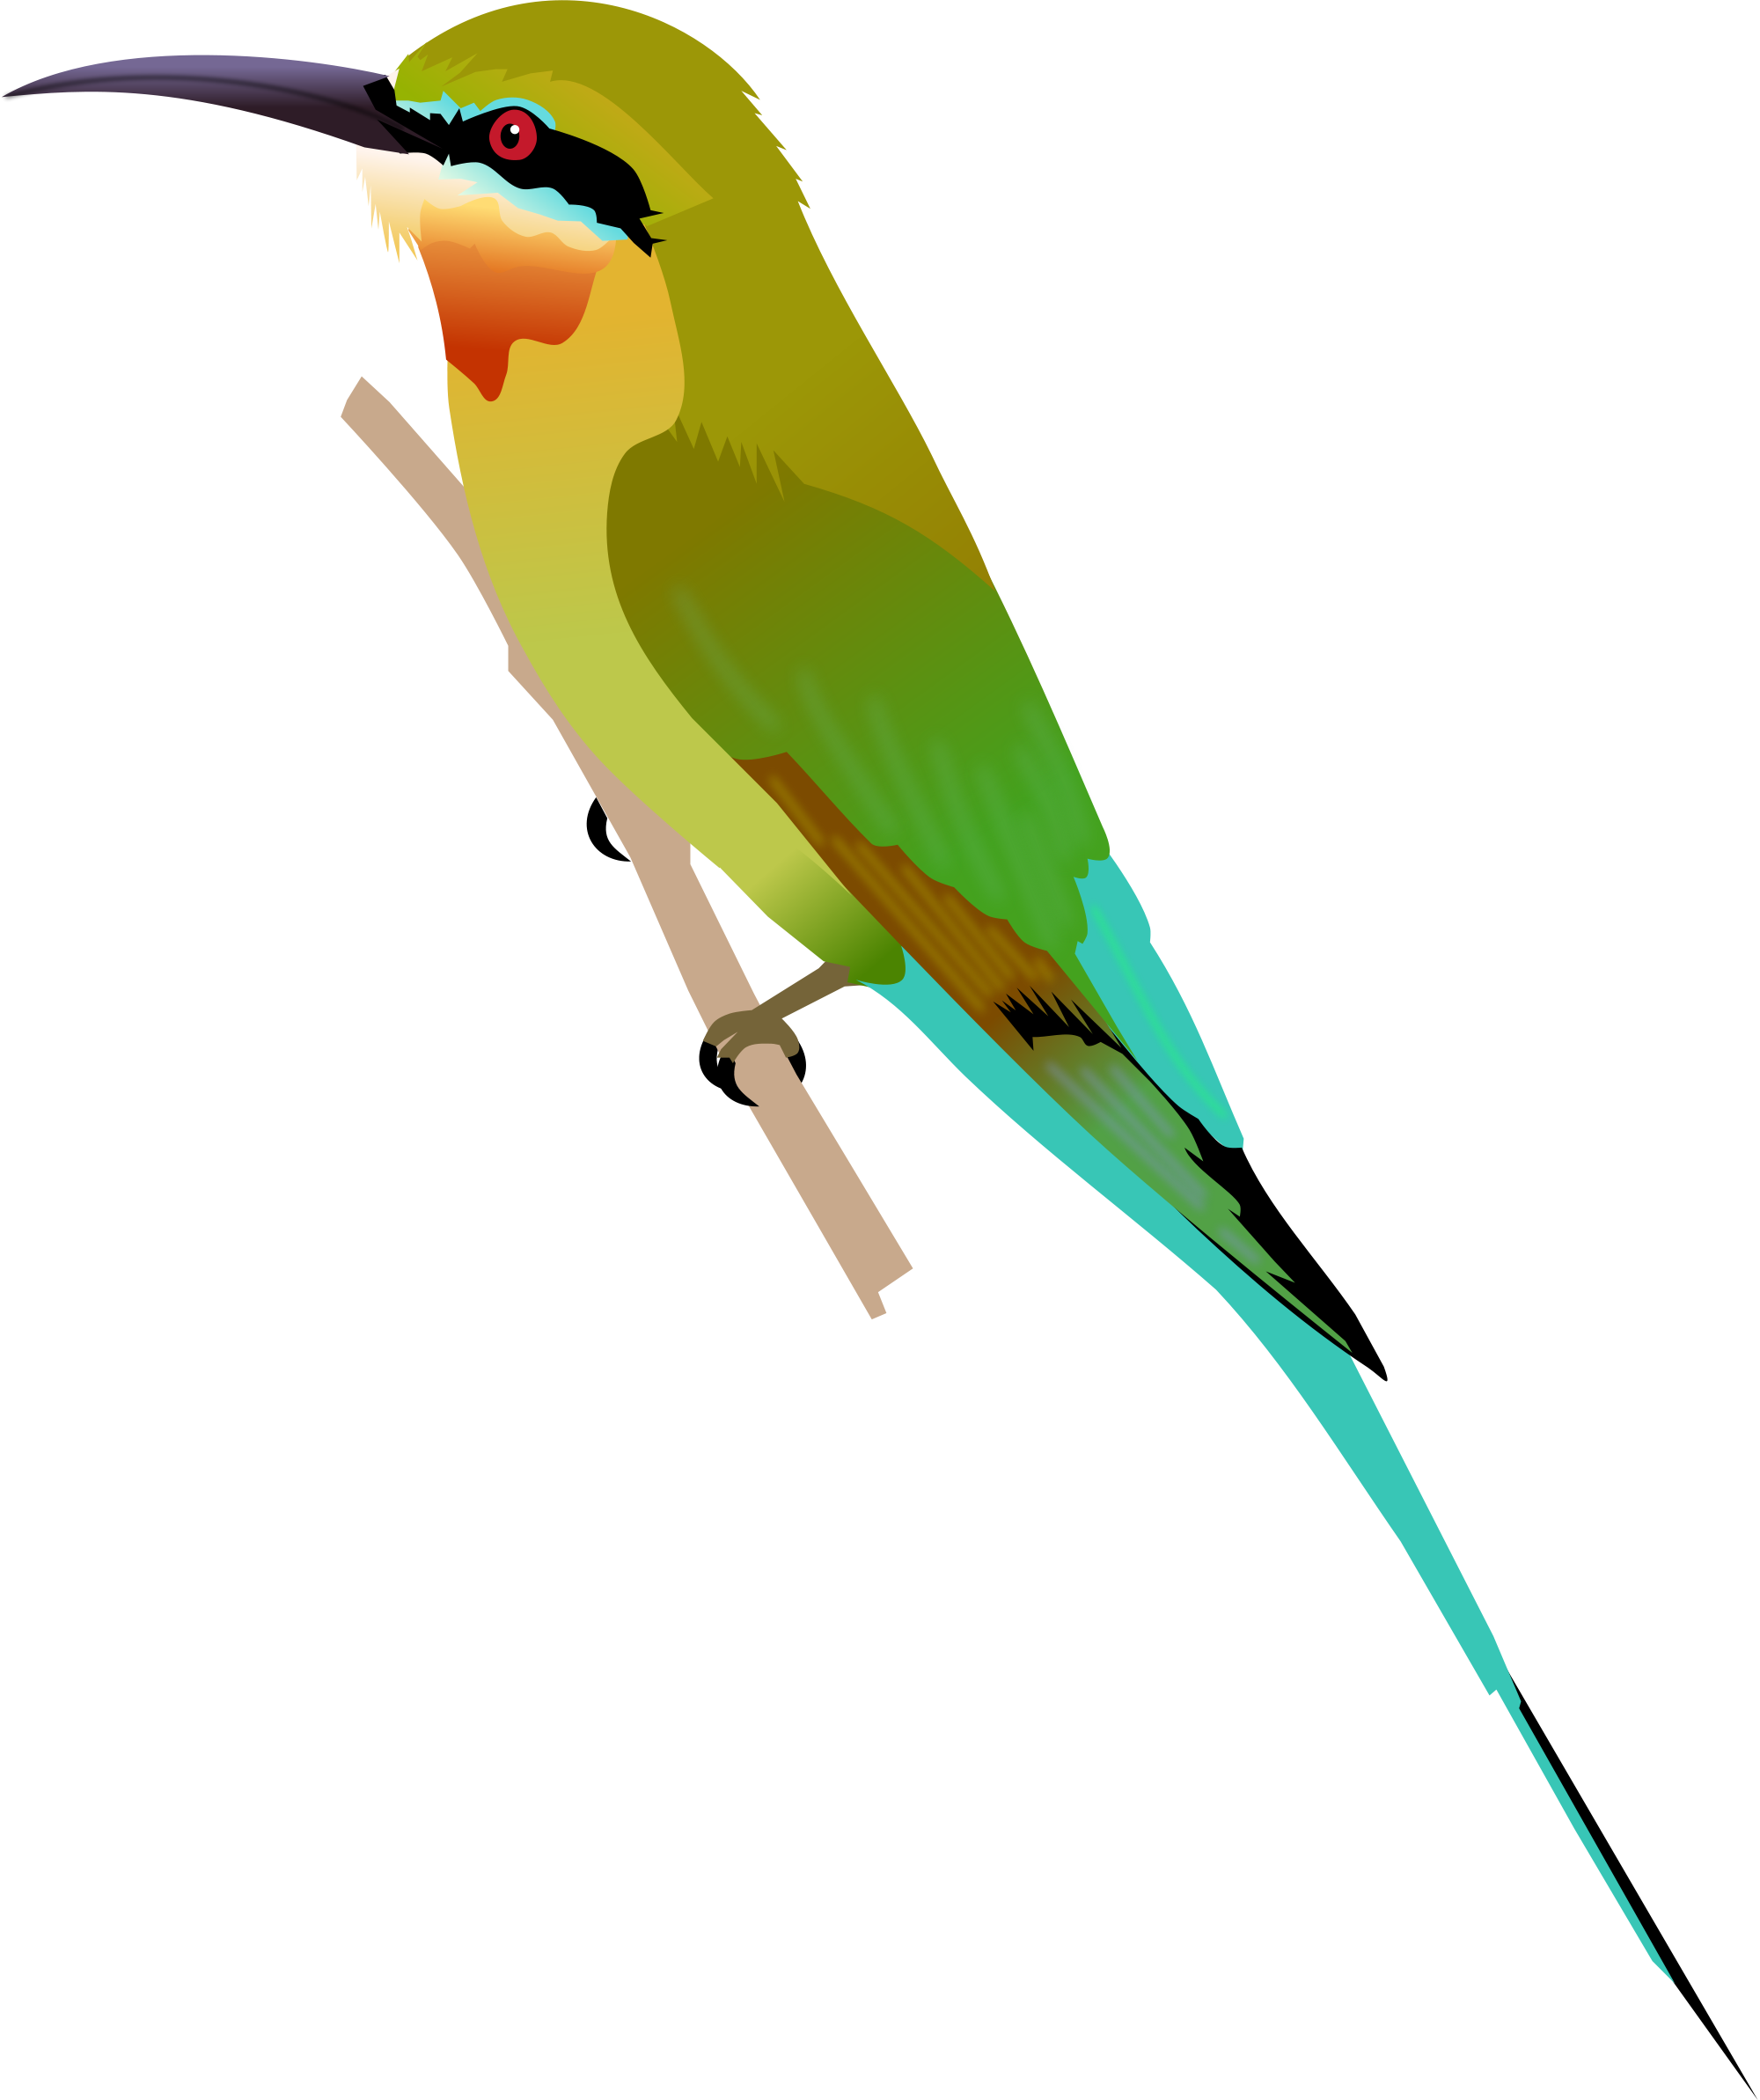 Bee-eater svg #11, Download drawings